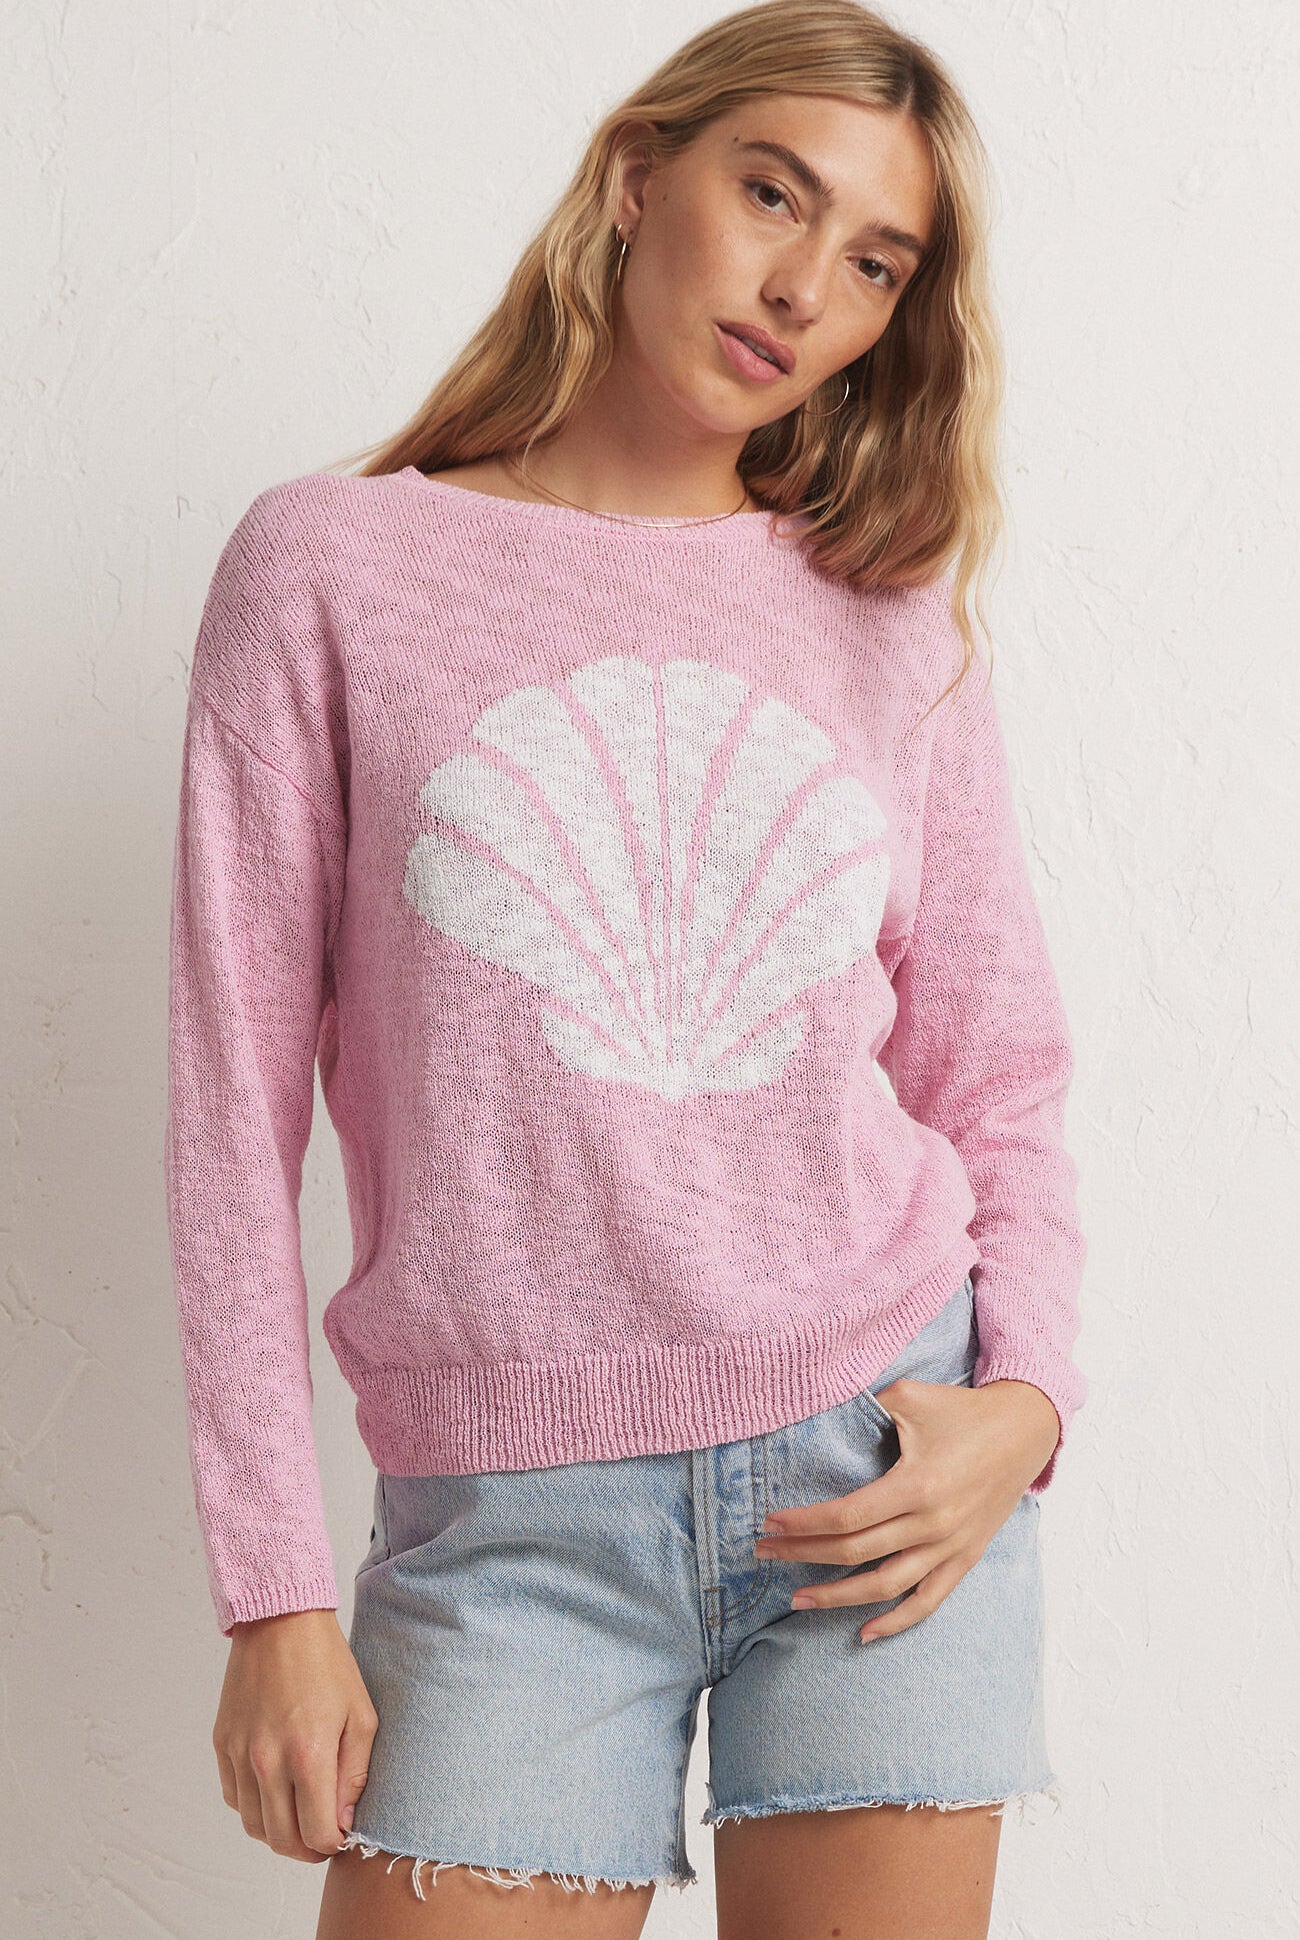 Shell Yeah Sweater-Sweaters-Vixen Collection, Day Spa and Women's Boutique Located in Seattle, Washington